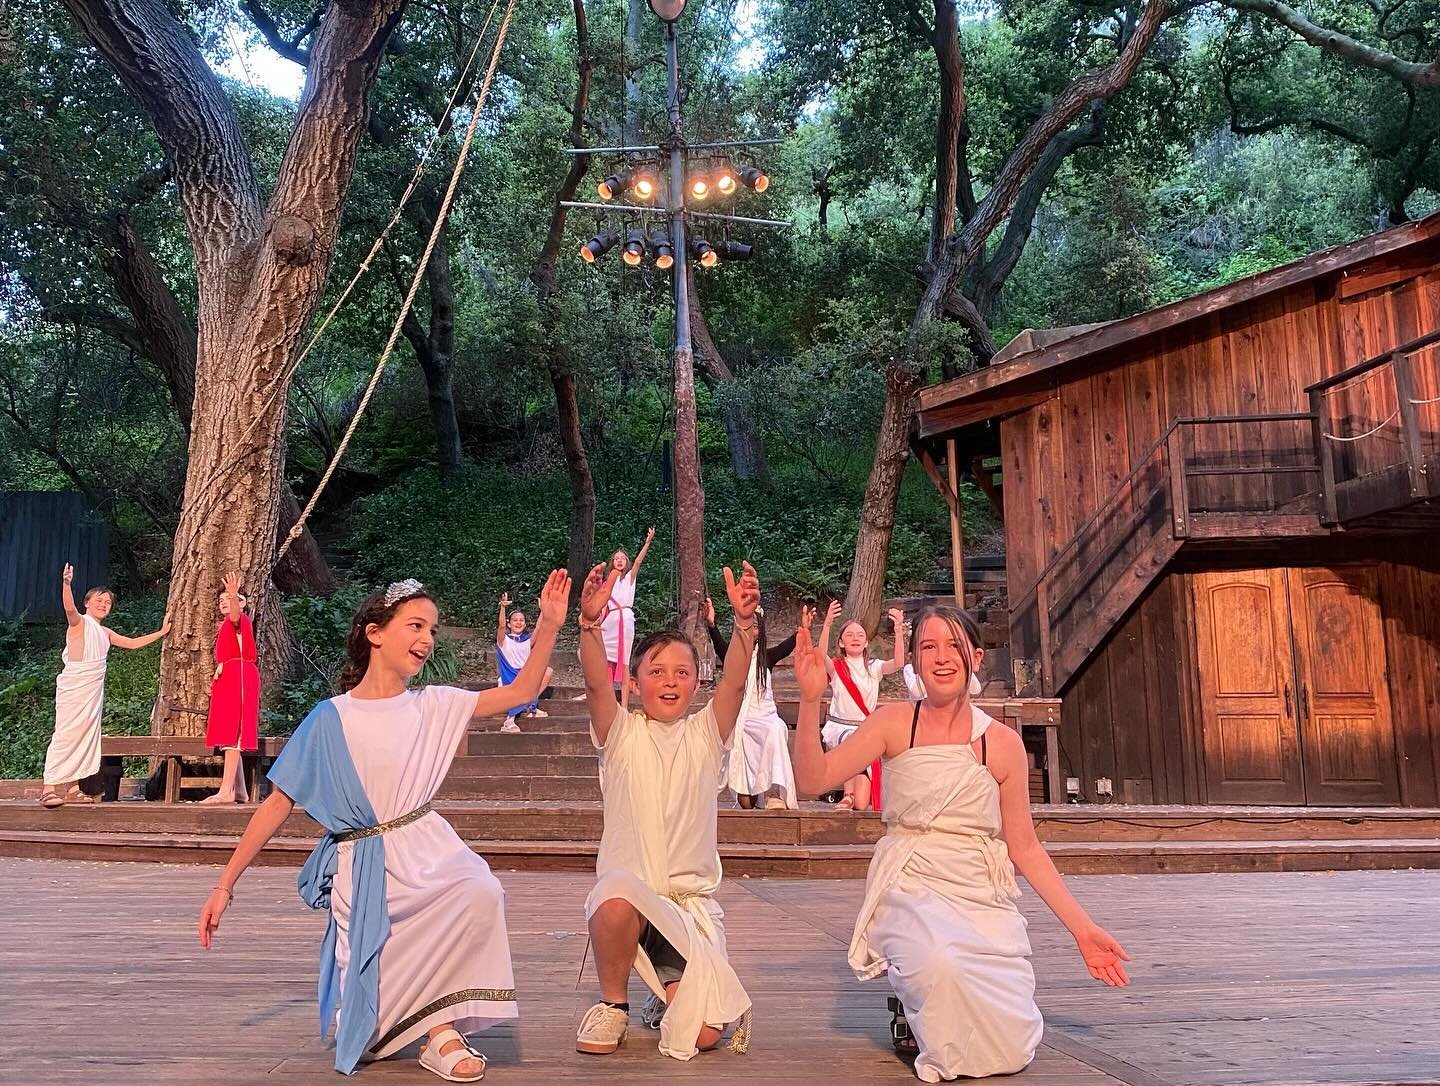 Group Sixers magnificently culminated this evening at @theatricum_botanicum - sharing their knowledge of the origins of democracy and demonstrating their beautiful connections to each other and art. #westlandschool